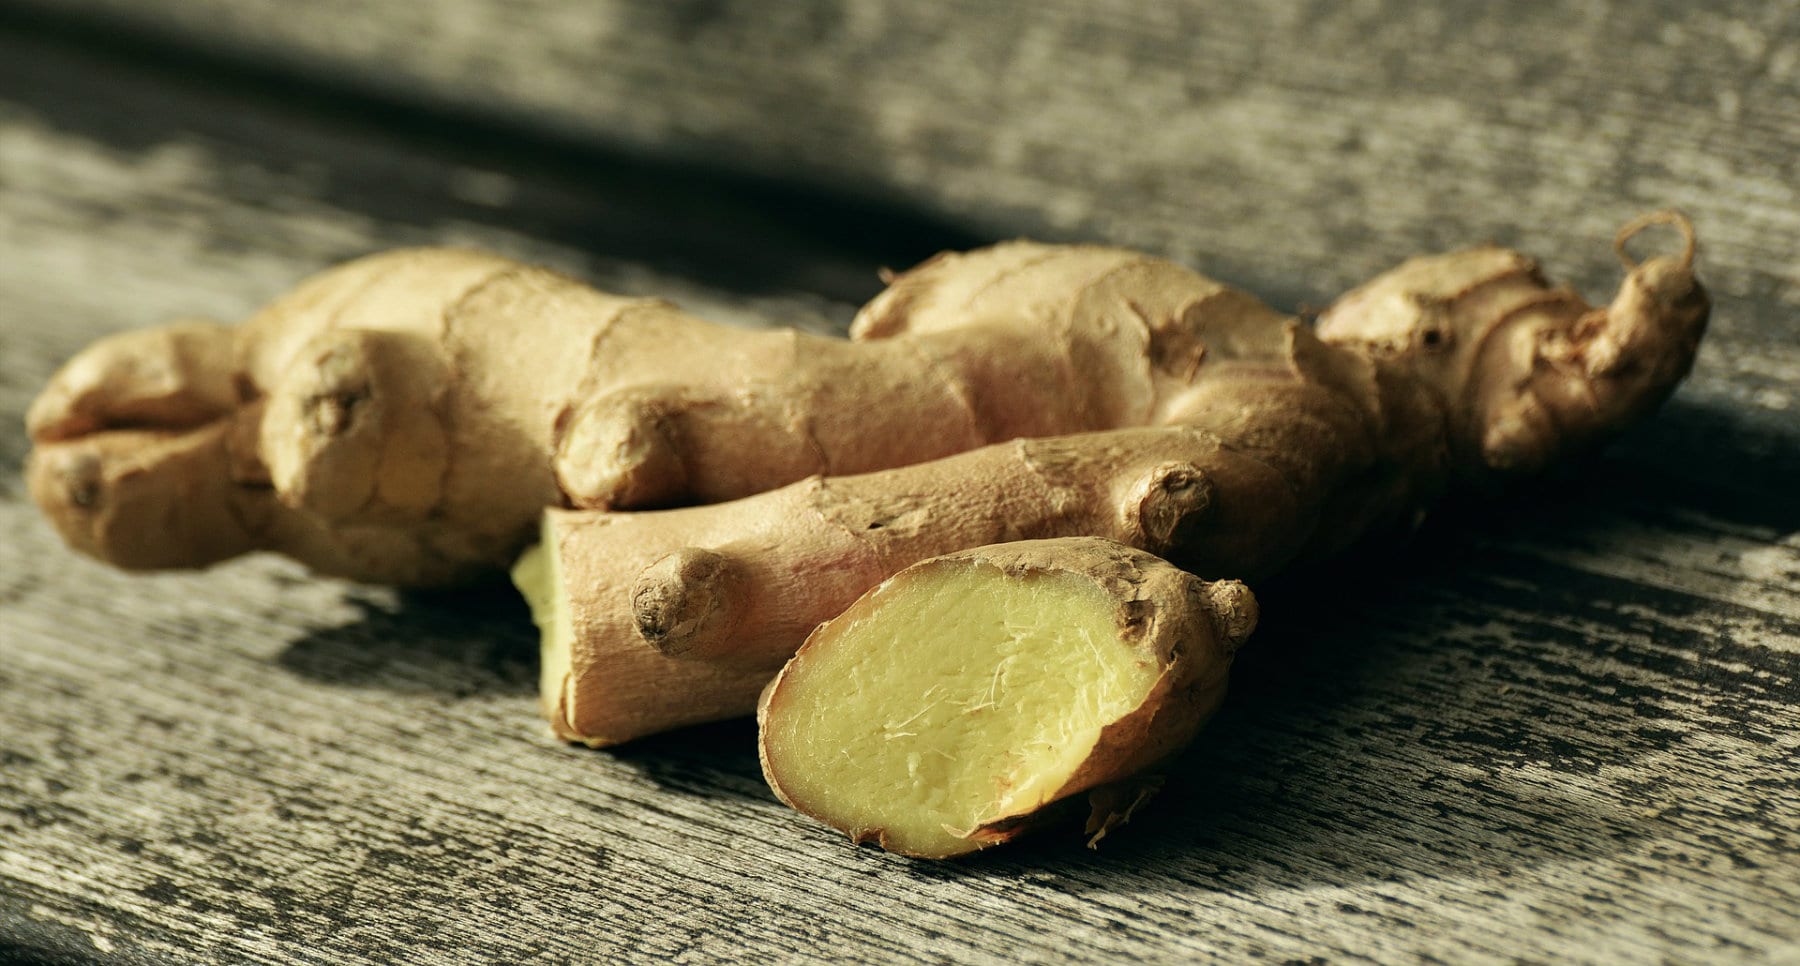 Top 3 Health Benefits Of Ginger And Ways To Use It